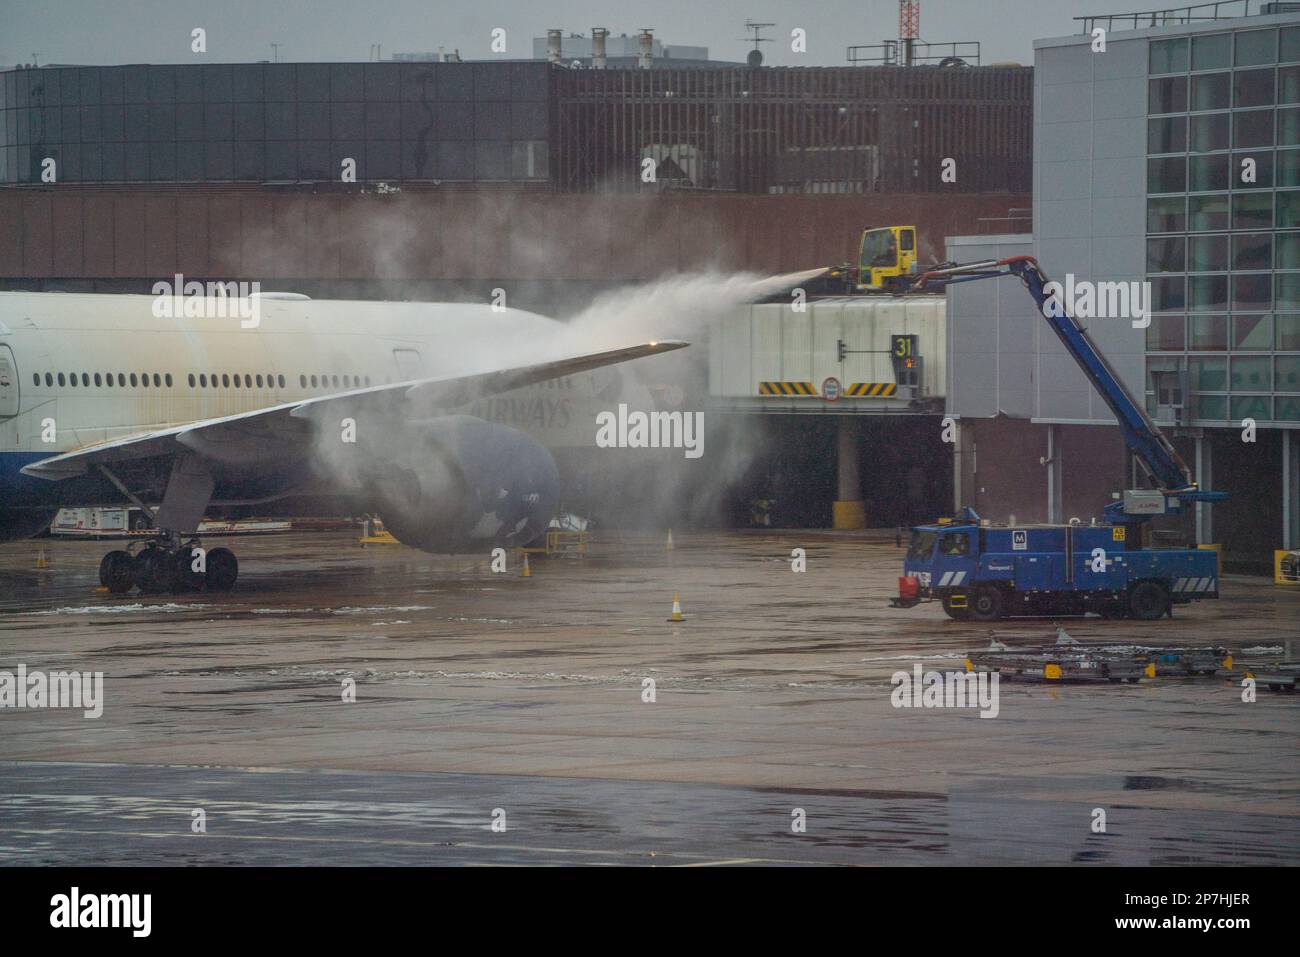 London, UK. 8 March 2023. A British Airways  passenger aircraft  is  sprayed green with De-Icing liquid at Gatwick airport to remove snow and ice . A weather warning has been issued as an Artic blast hits many parts of the UK with freezing temperatures causing travel delays at airports.  Credit: amer ghazzal/Alamy Live News. Credit: amer ghazzal/Alamy Live News Stock Photo